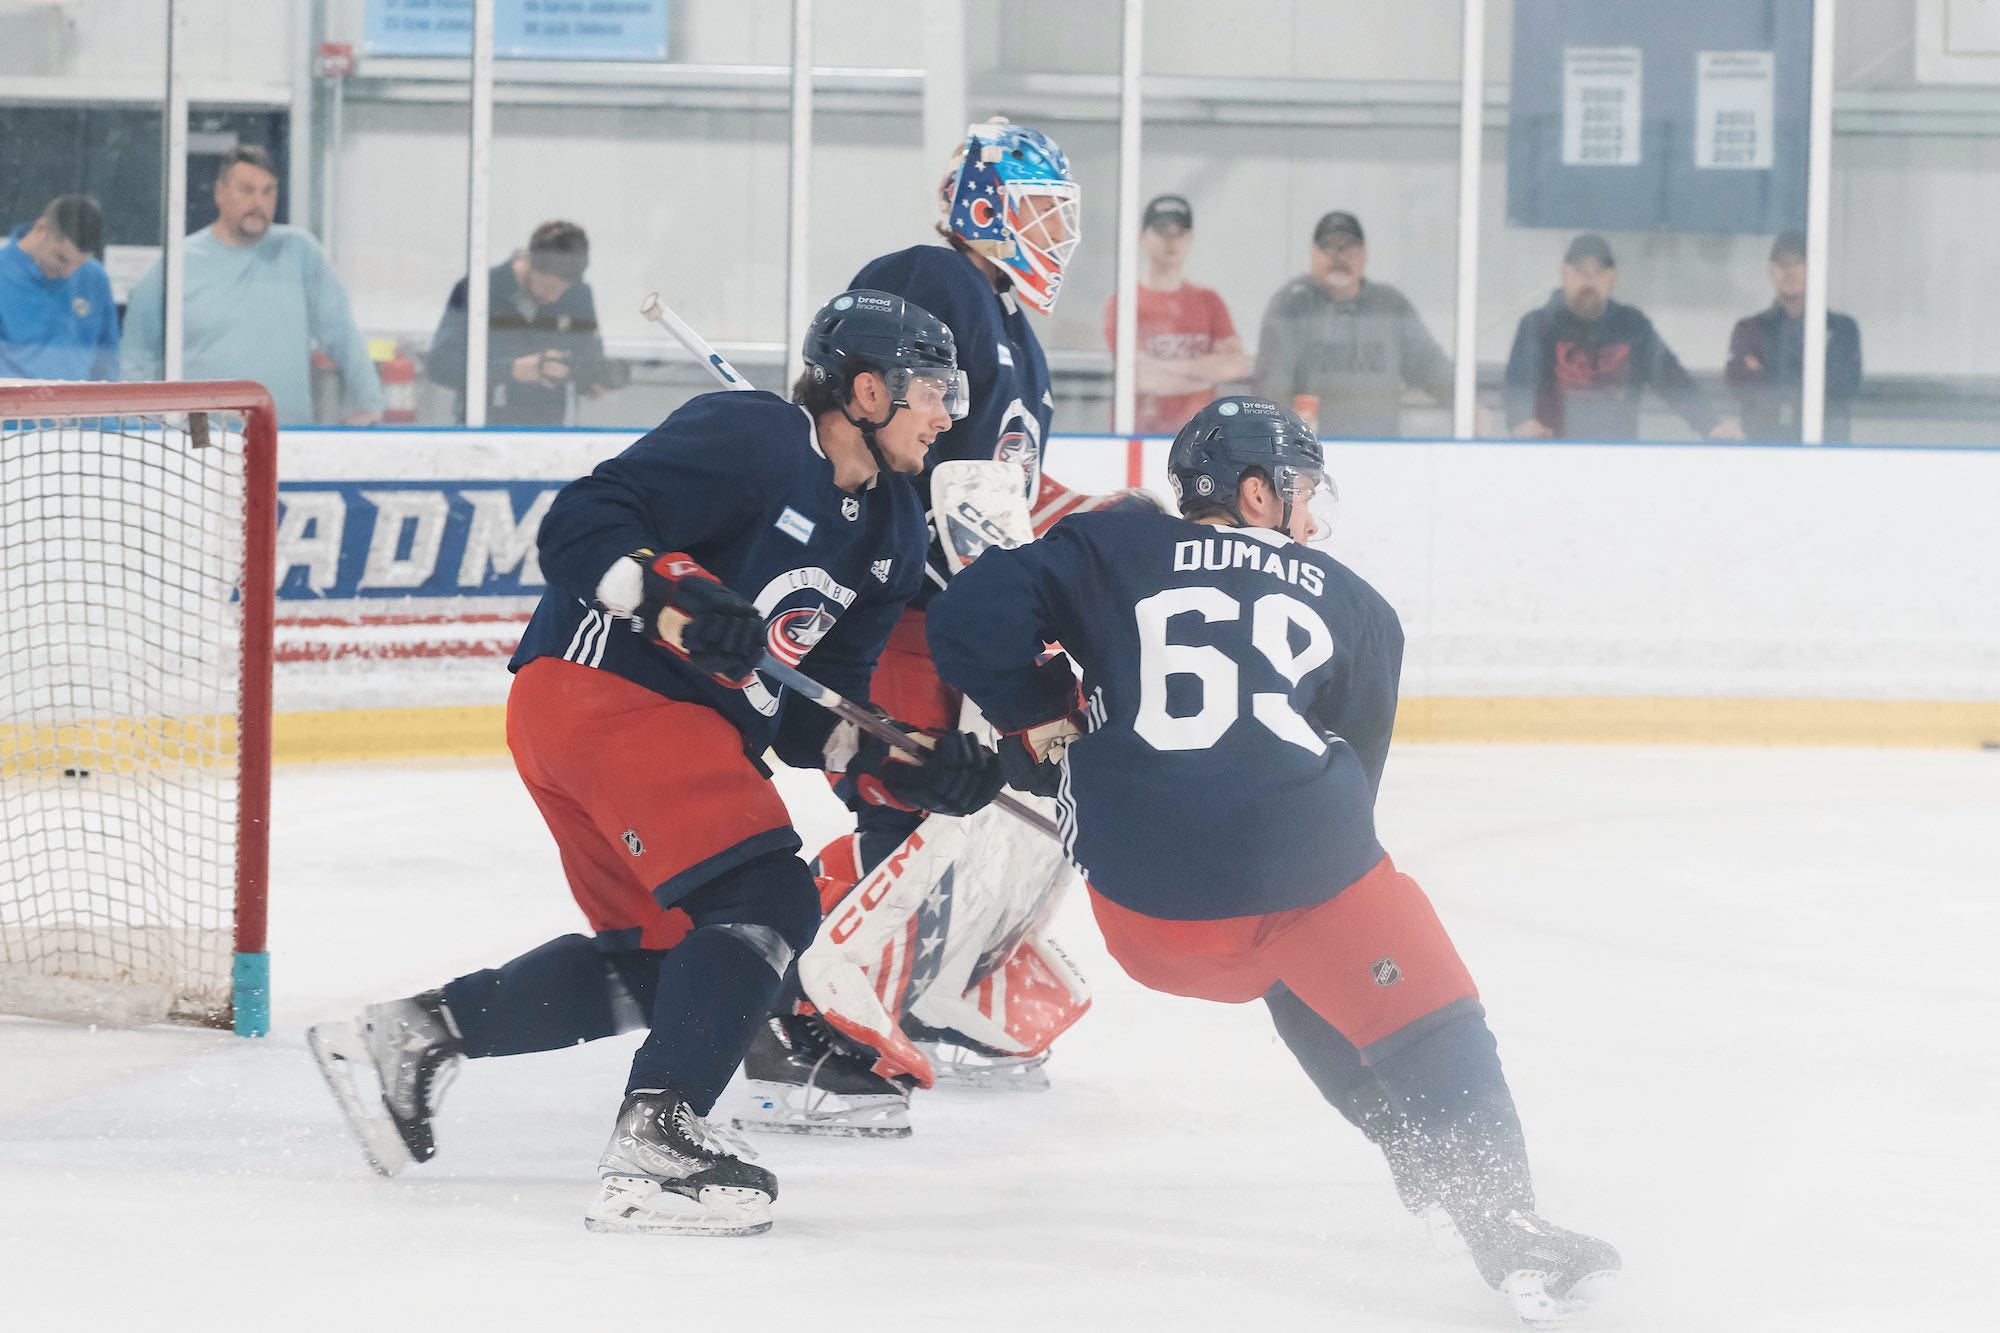 Exclusive Photos from CBJ Development Camp by Andy Newman